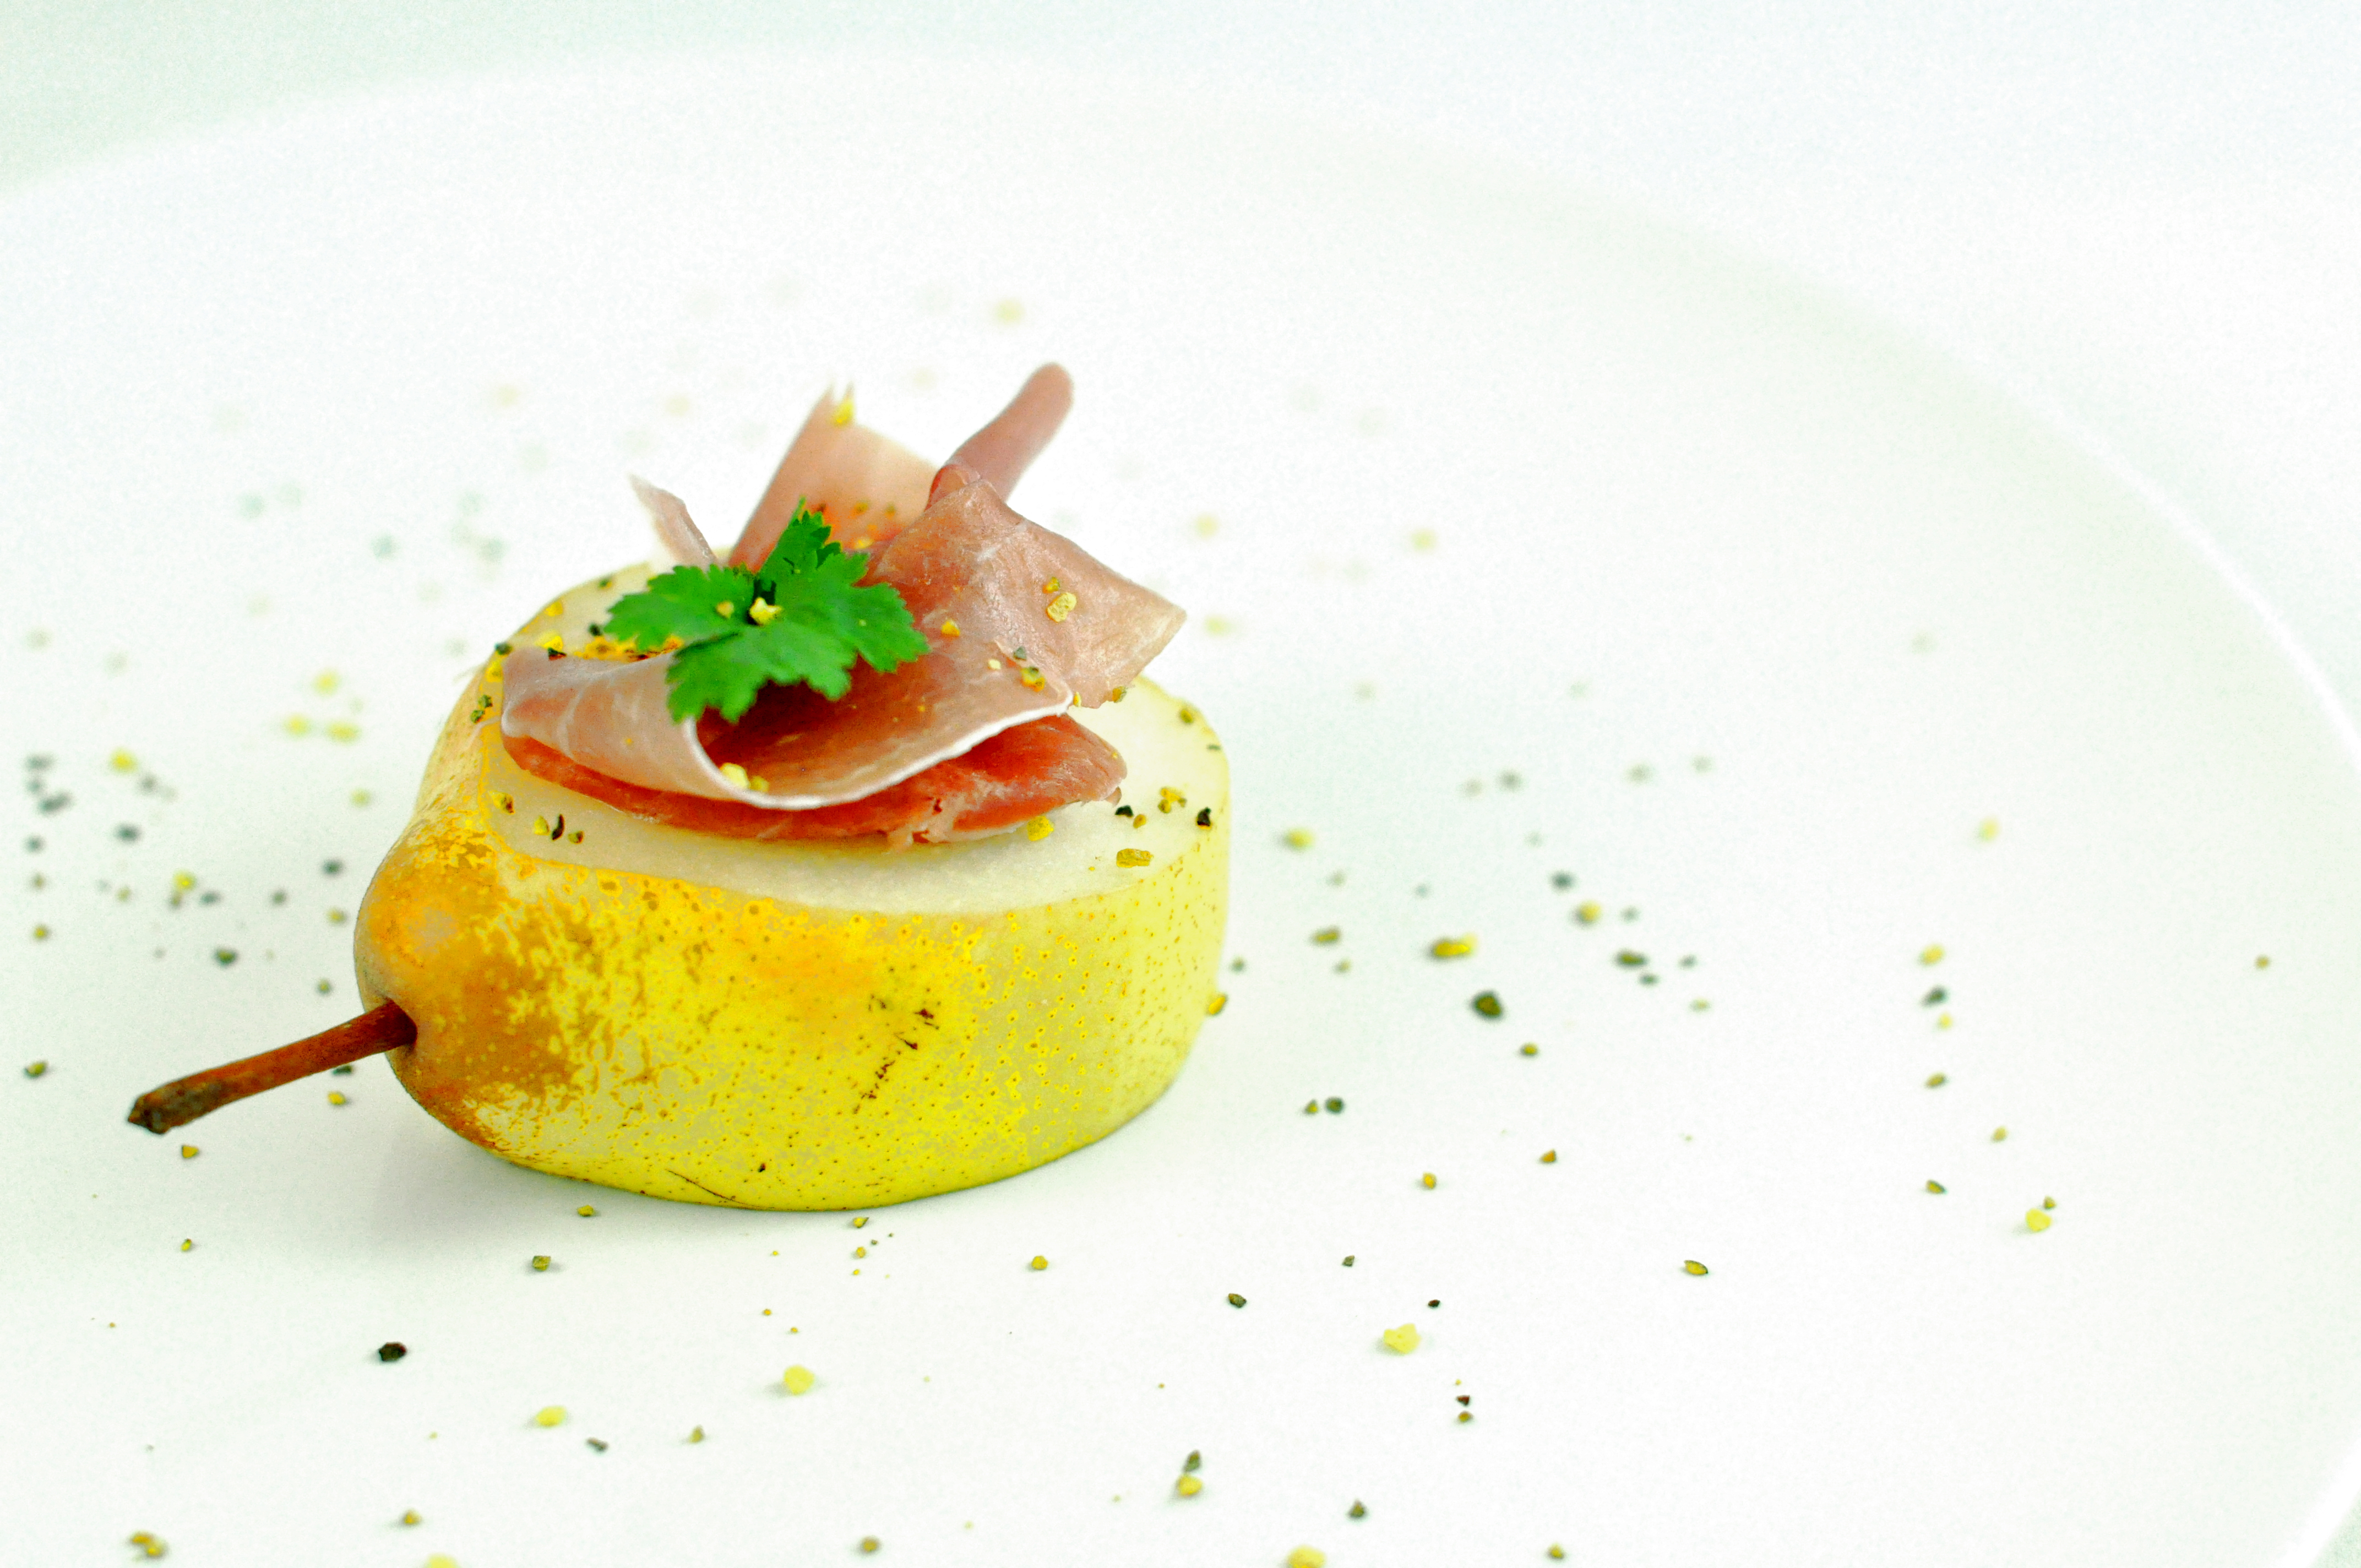 Pear with Parma ham